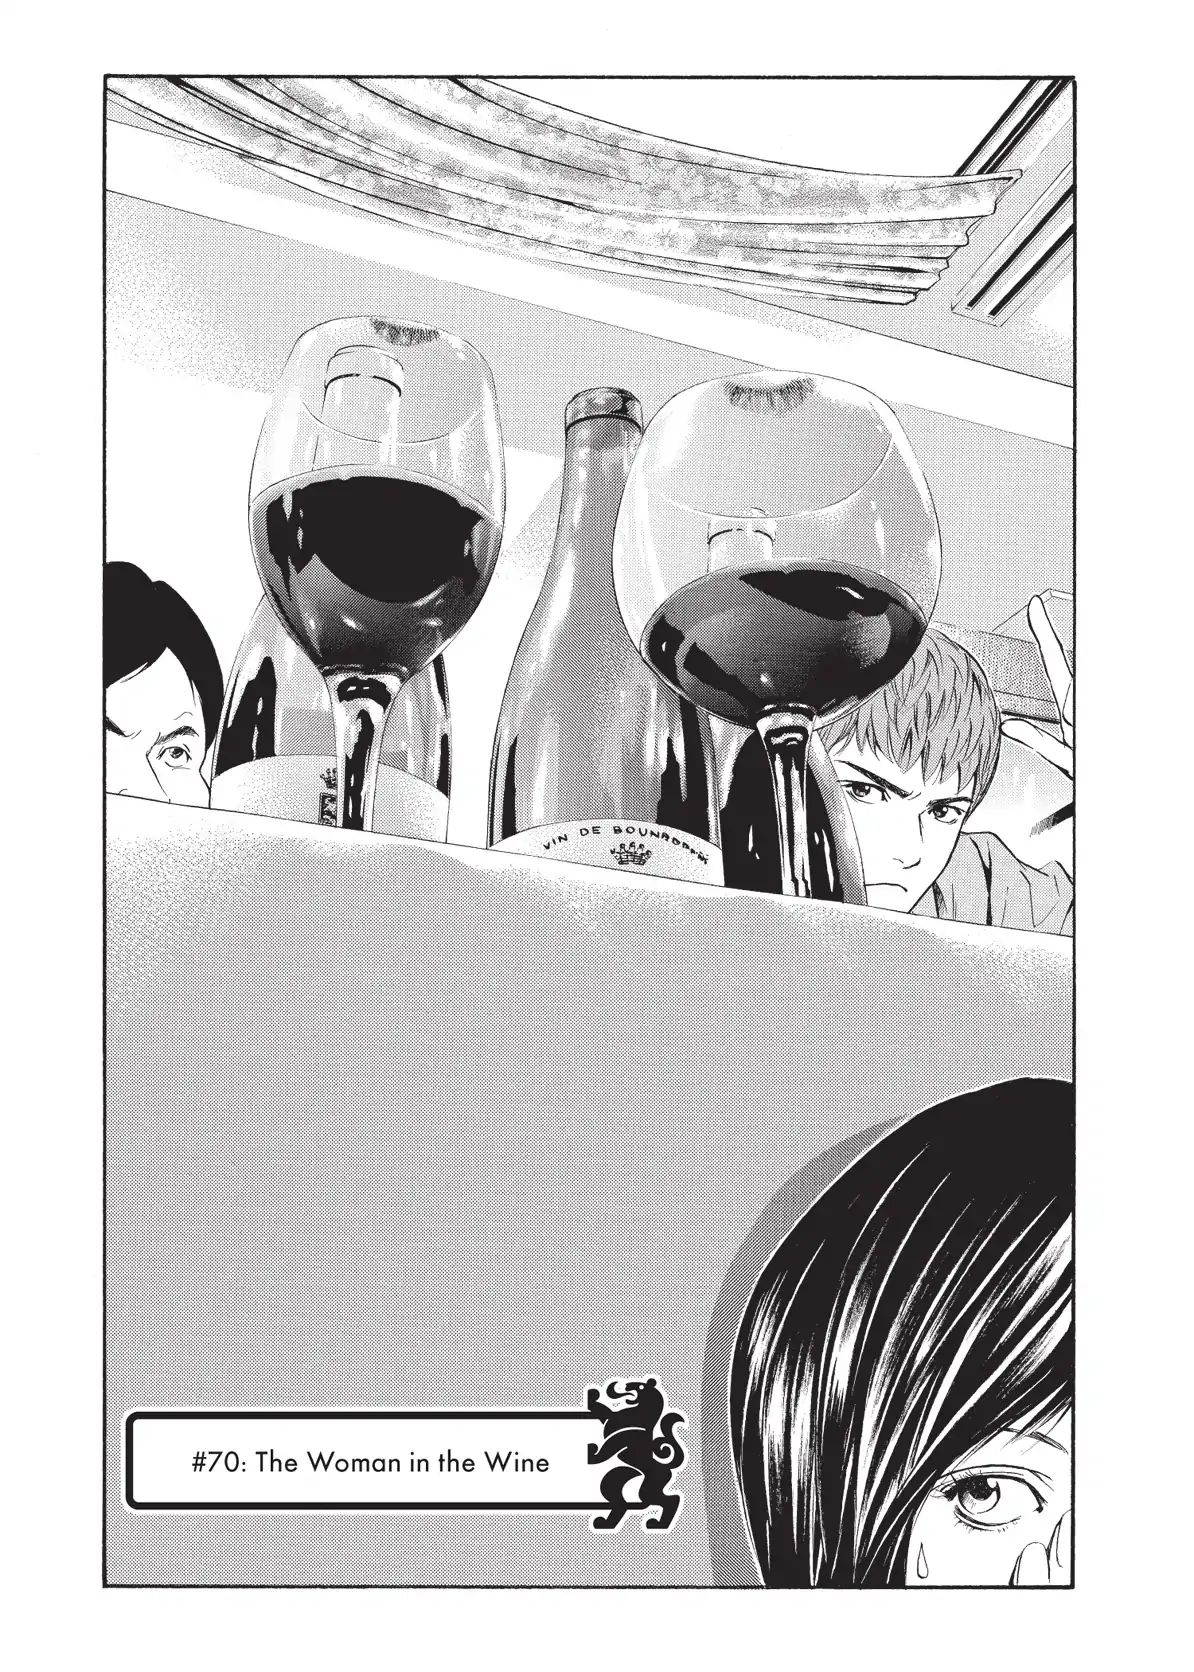 Kami No Shizuku Vol.4 Chapter 70: The Woman In The Wine - Picture 1